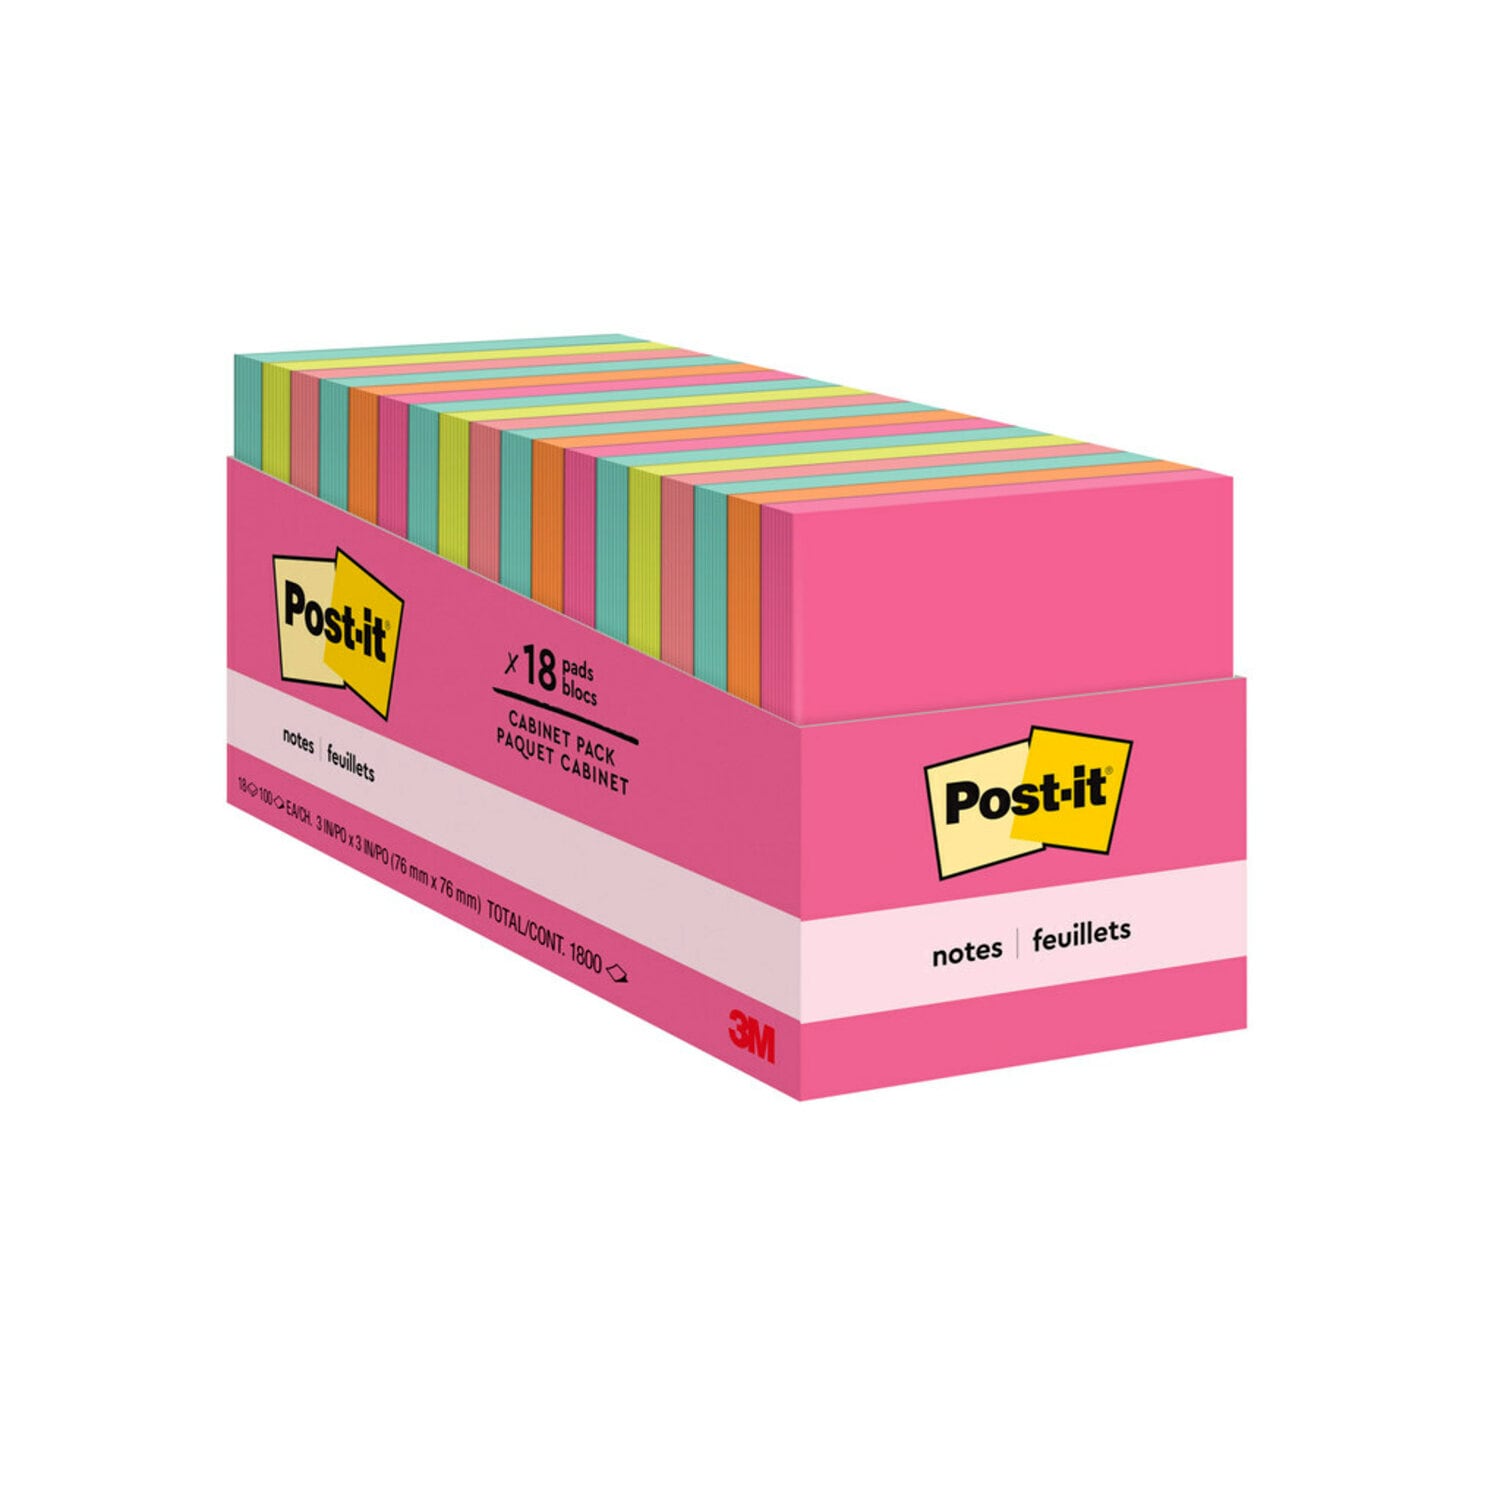 7010371259 - Post-it Notes 654-18CTCP, 3 in x 3 in (76 mm x 76 mm),Cabinet pack,
Cape Town Collection, 18 Pads/Pack, 100 Sheets/Pad